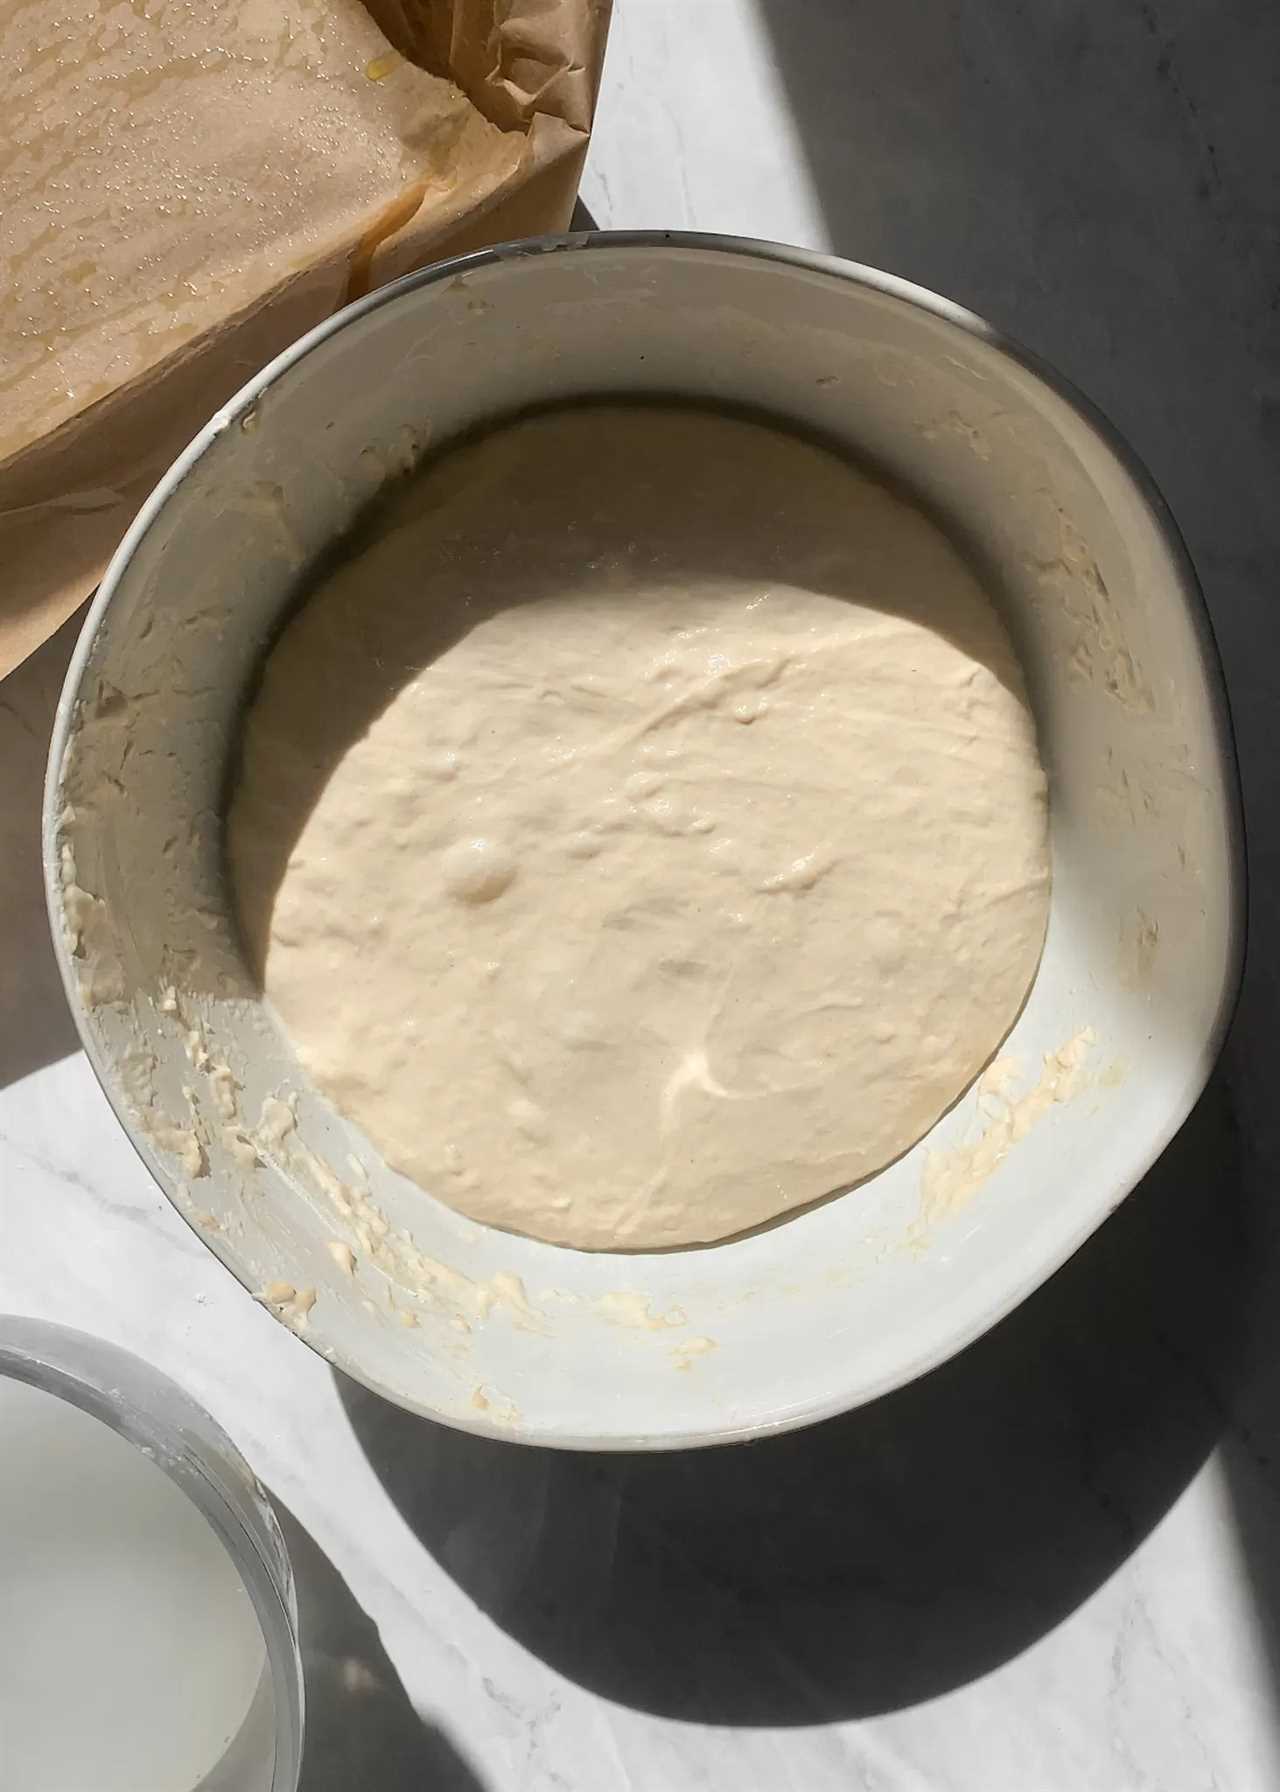 smoothed out sourdough focaccia bread dough in a white bowl, after rising and stretching and folding the dough.